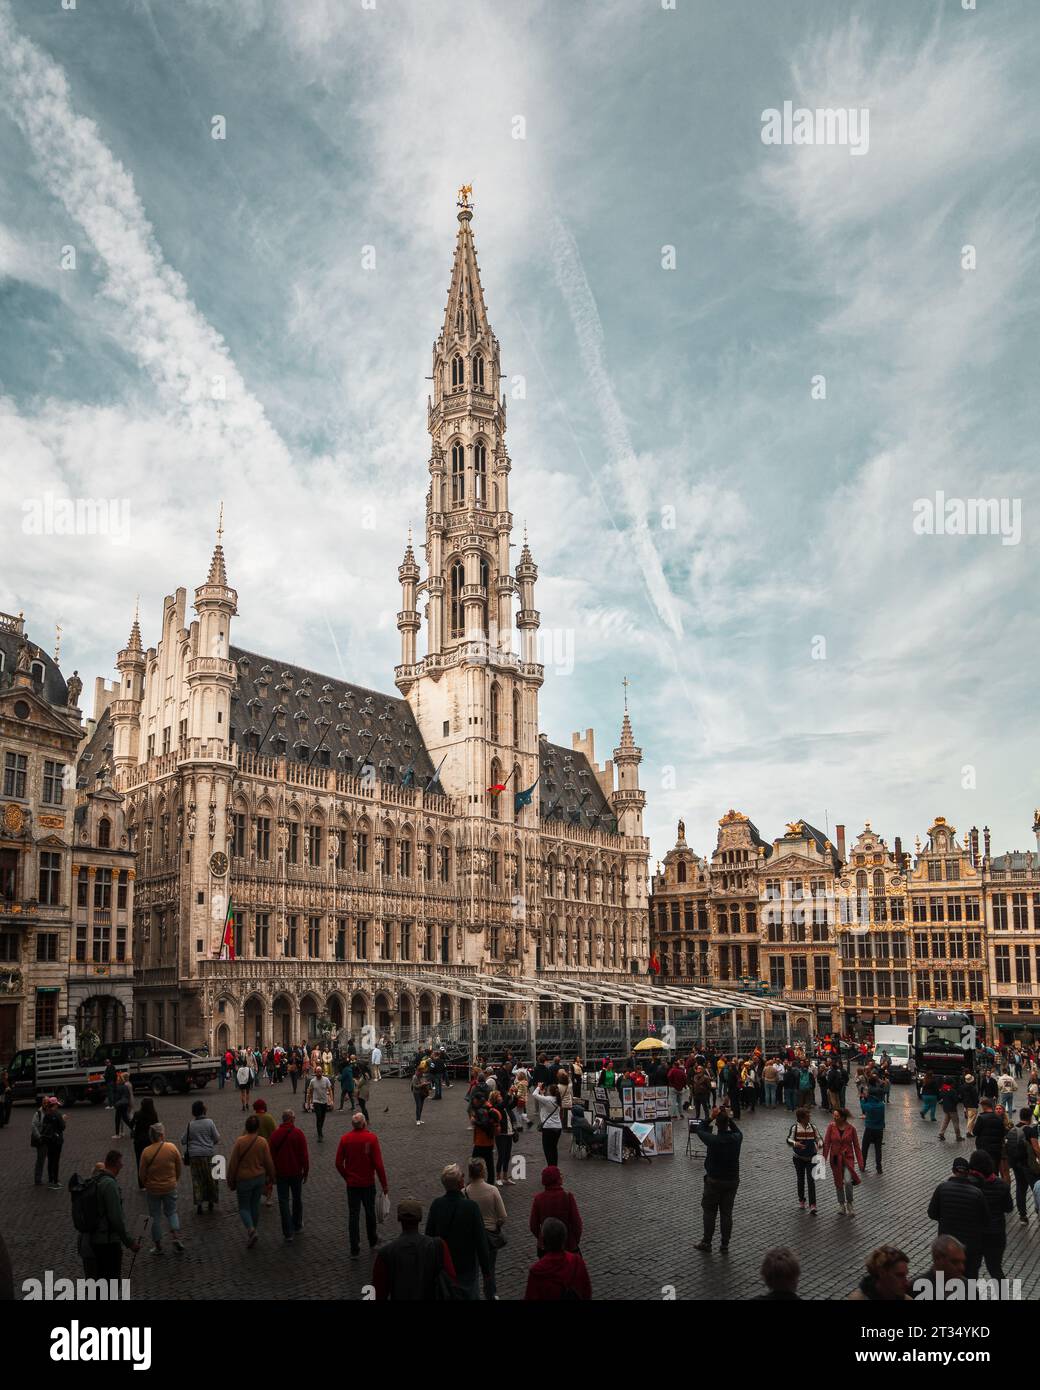 Grand-Place square (Grote Markt) in Brussels. Neo-Gothic City Hall of Brussels. Old Market Square Stock Photo